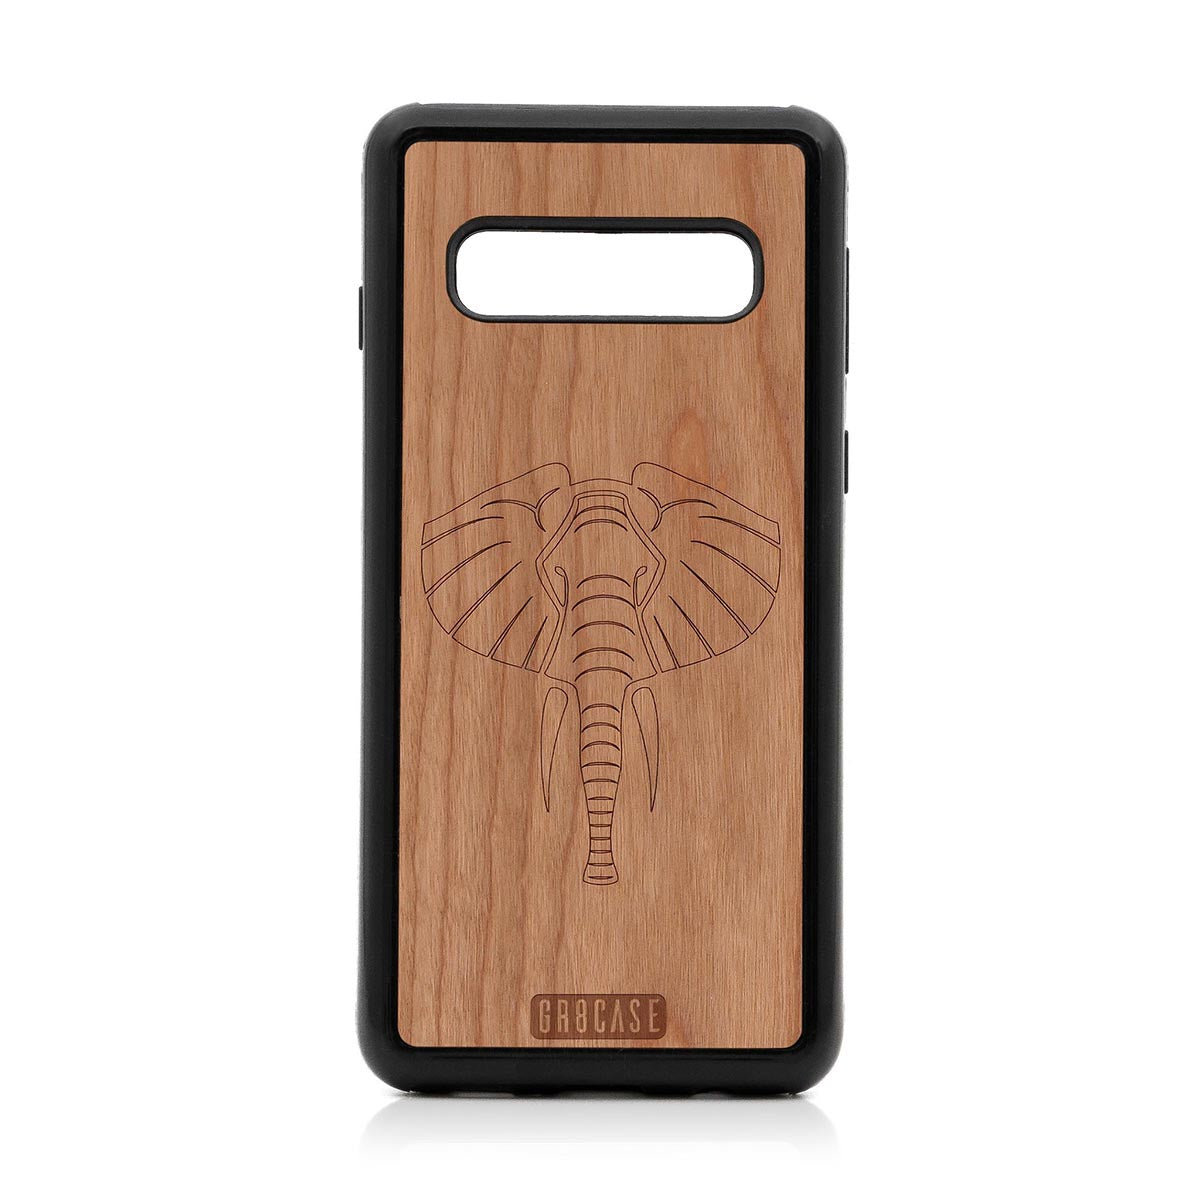 Elephant Design Wood Case For Samsung Galaxy S10 by GR8CASE